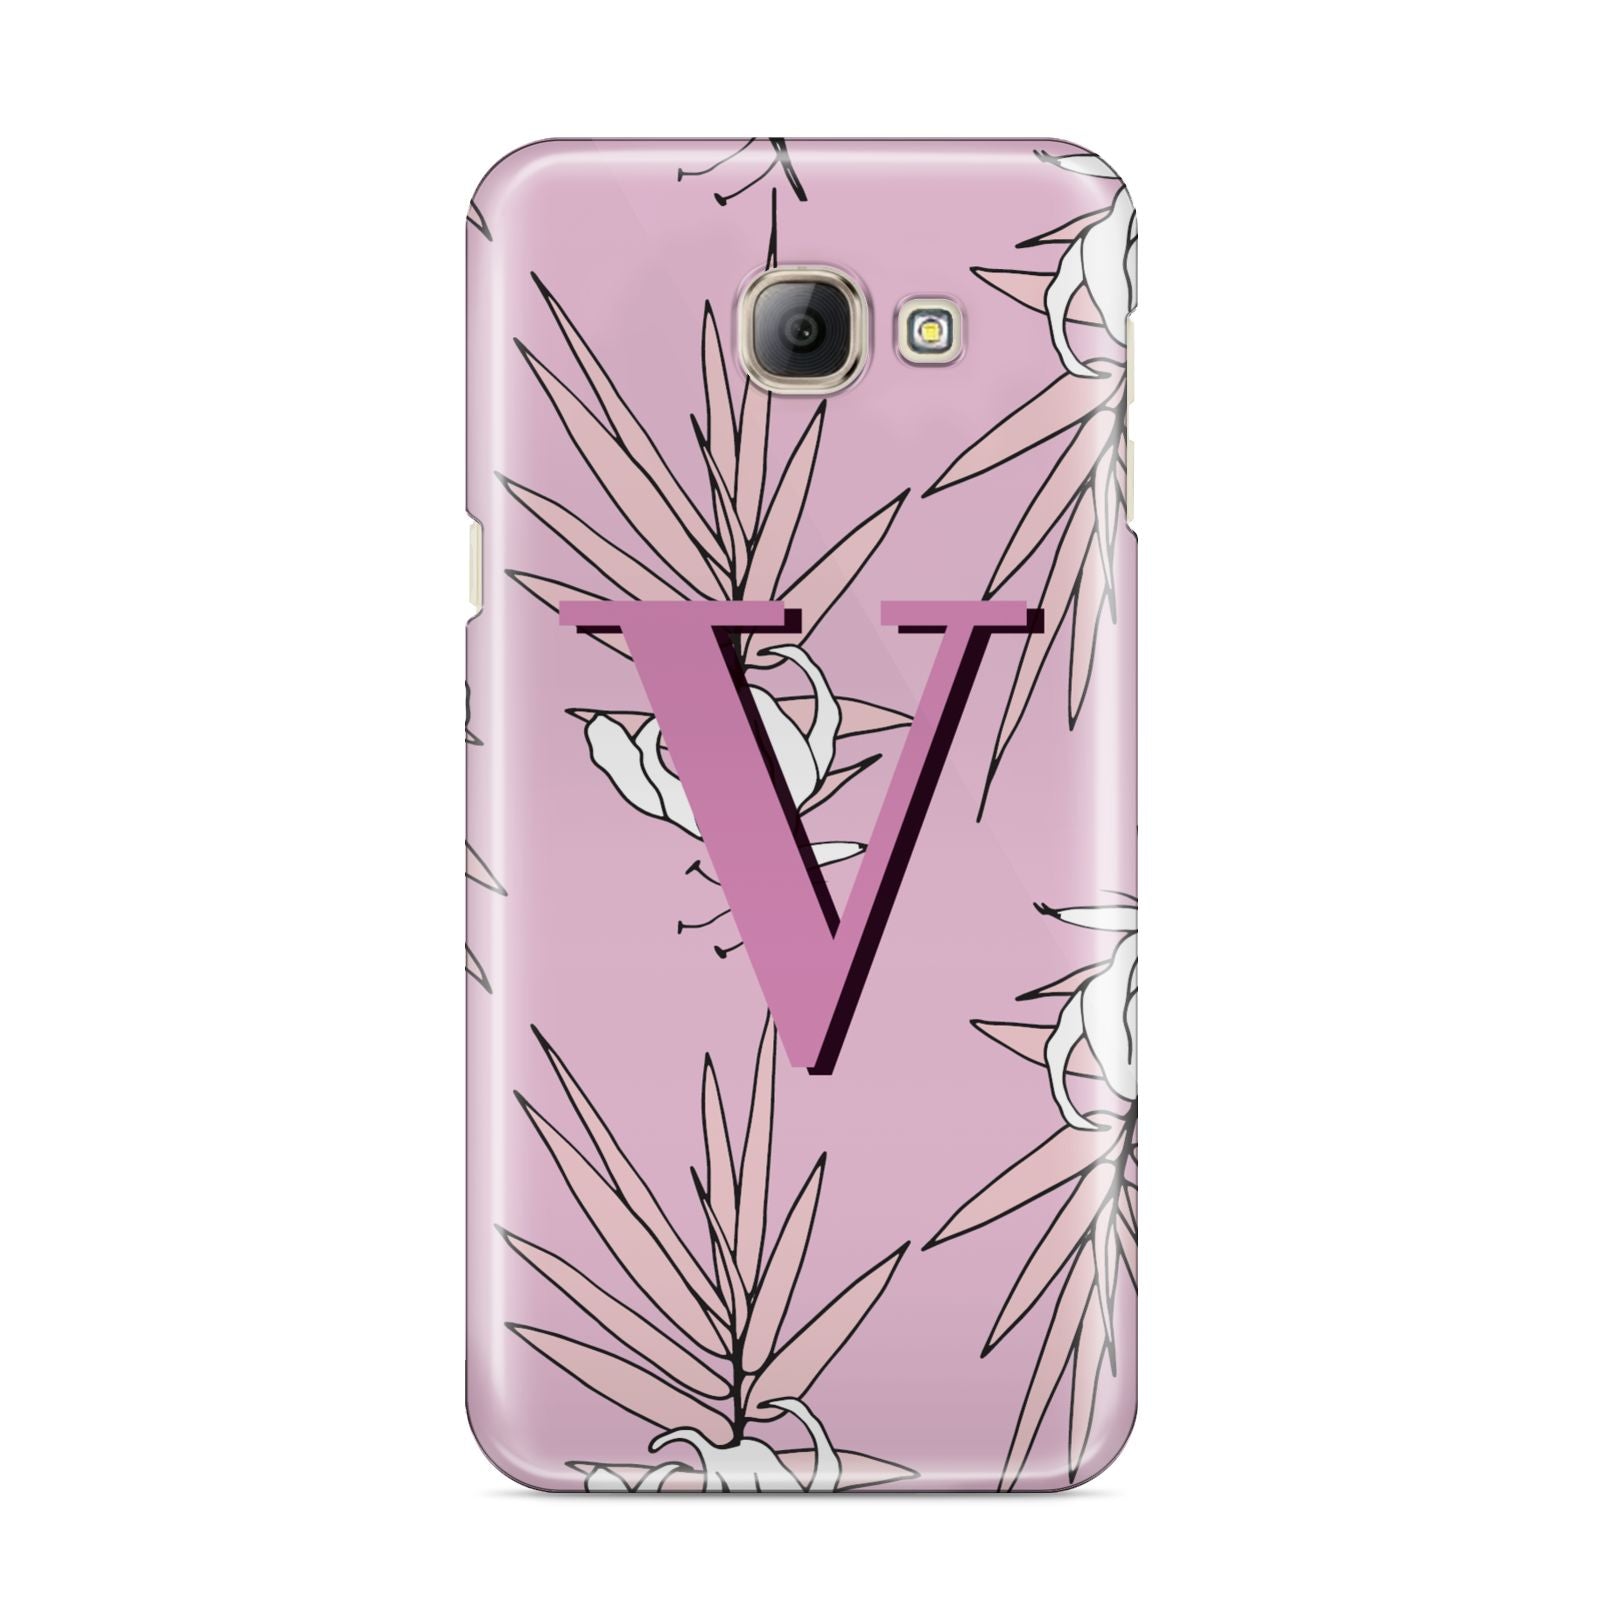 Personalised Pink and White Floral Monogram Samsung Galaxy A8 2016 Case